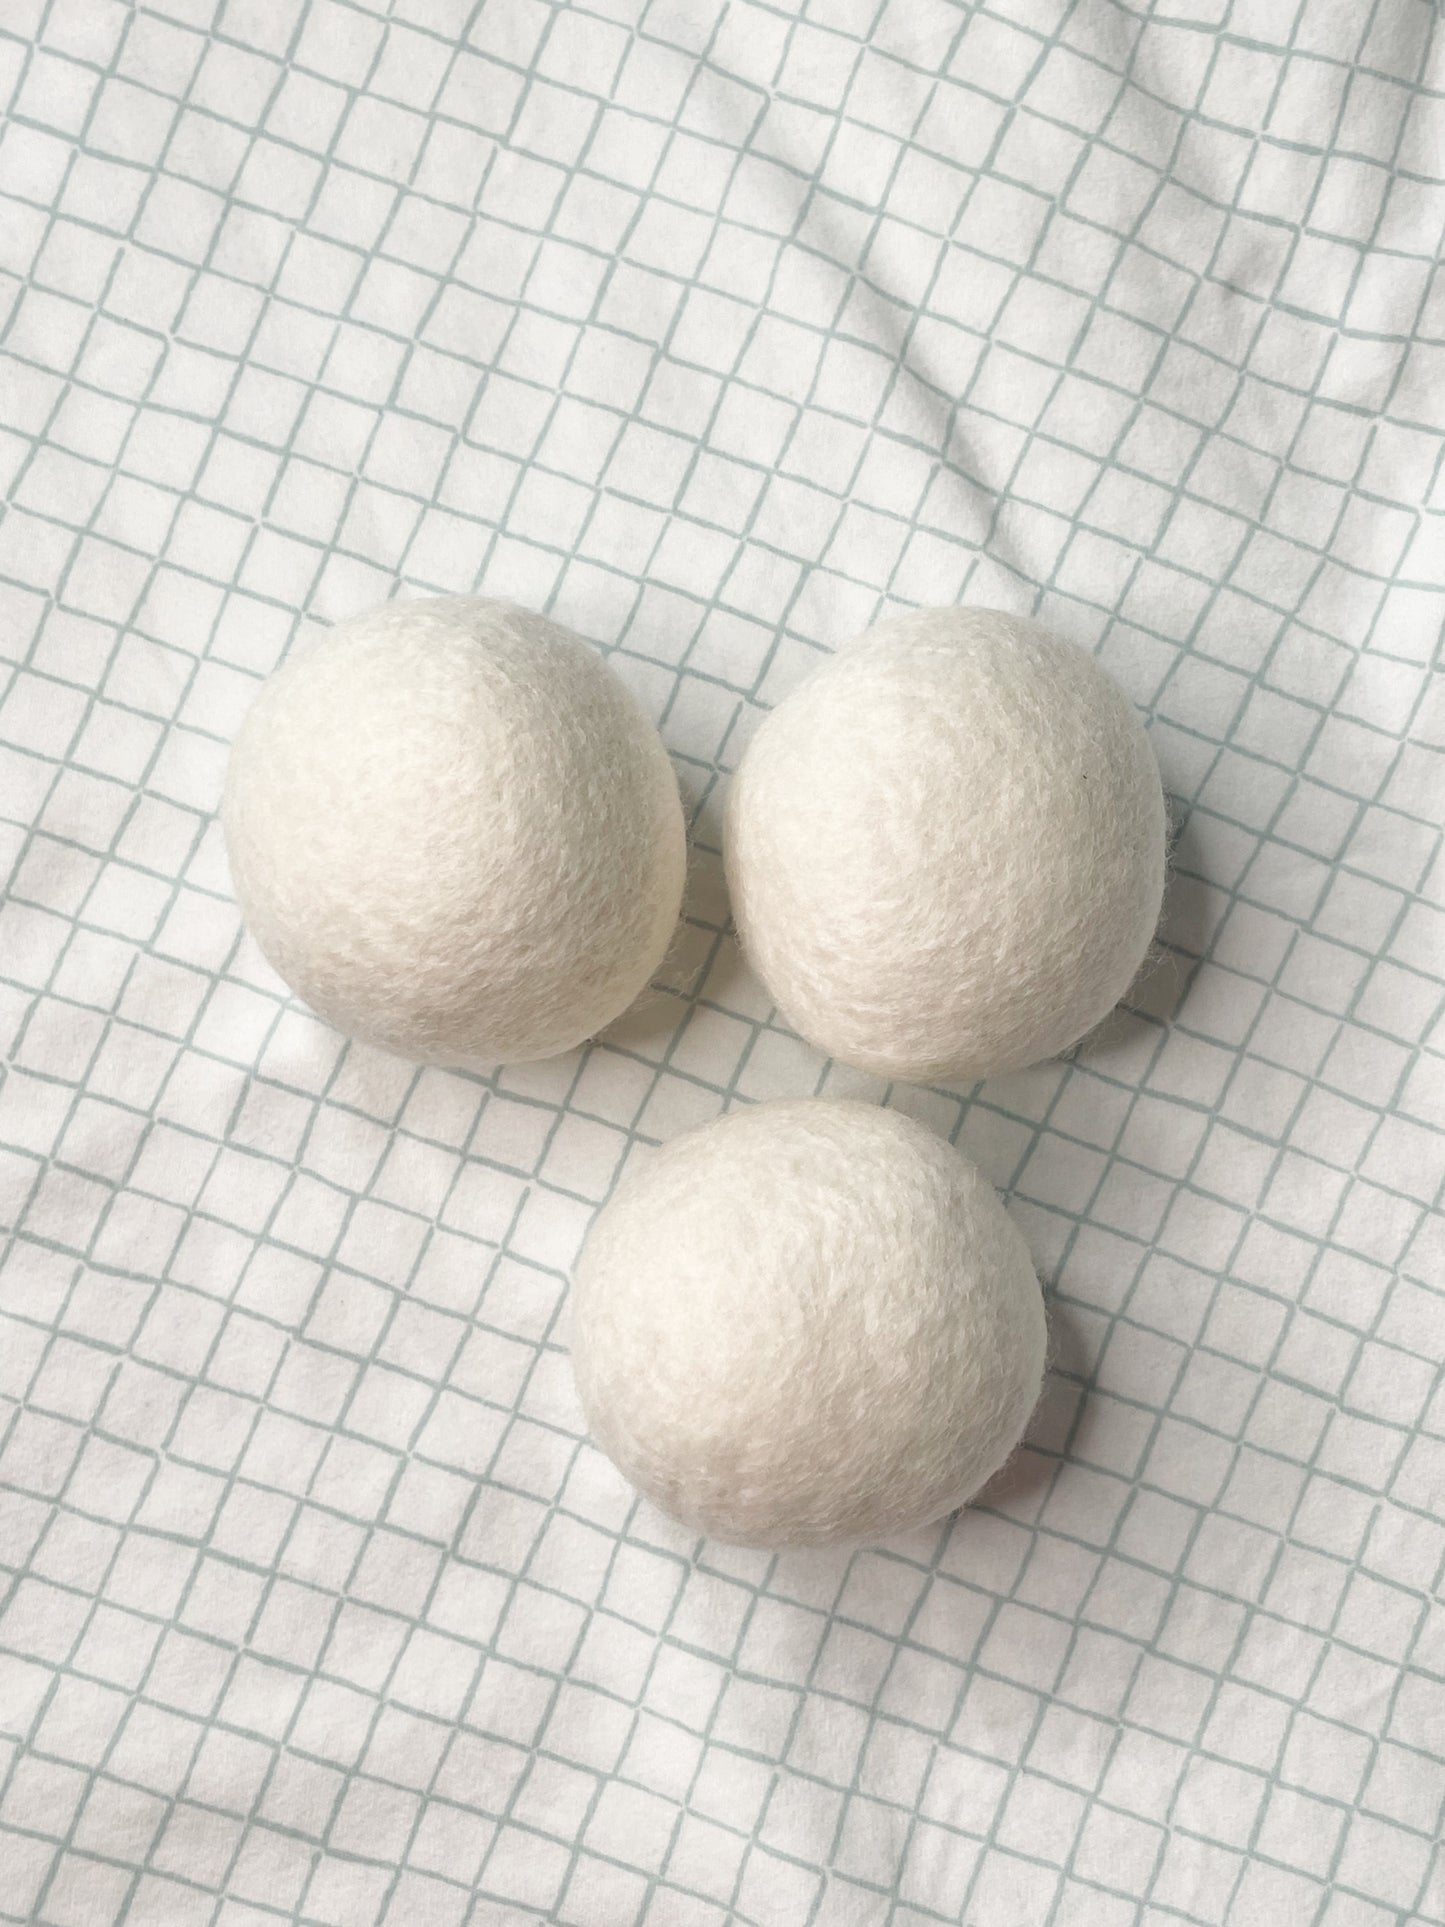 100% Pure Ethical Natural Dryer Balls - 3 Pack Made in Canada